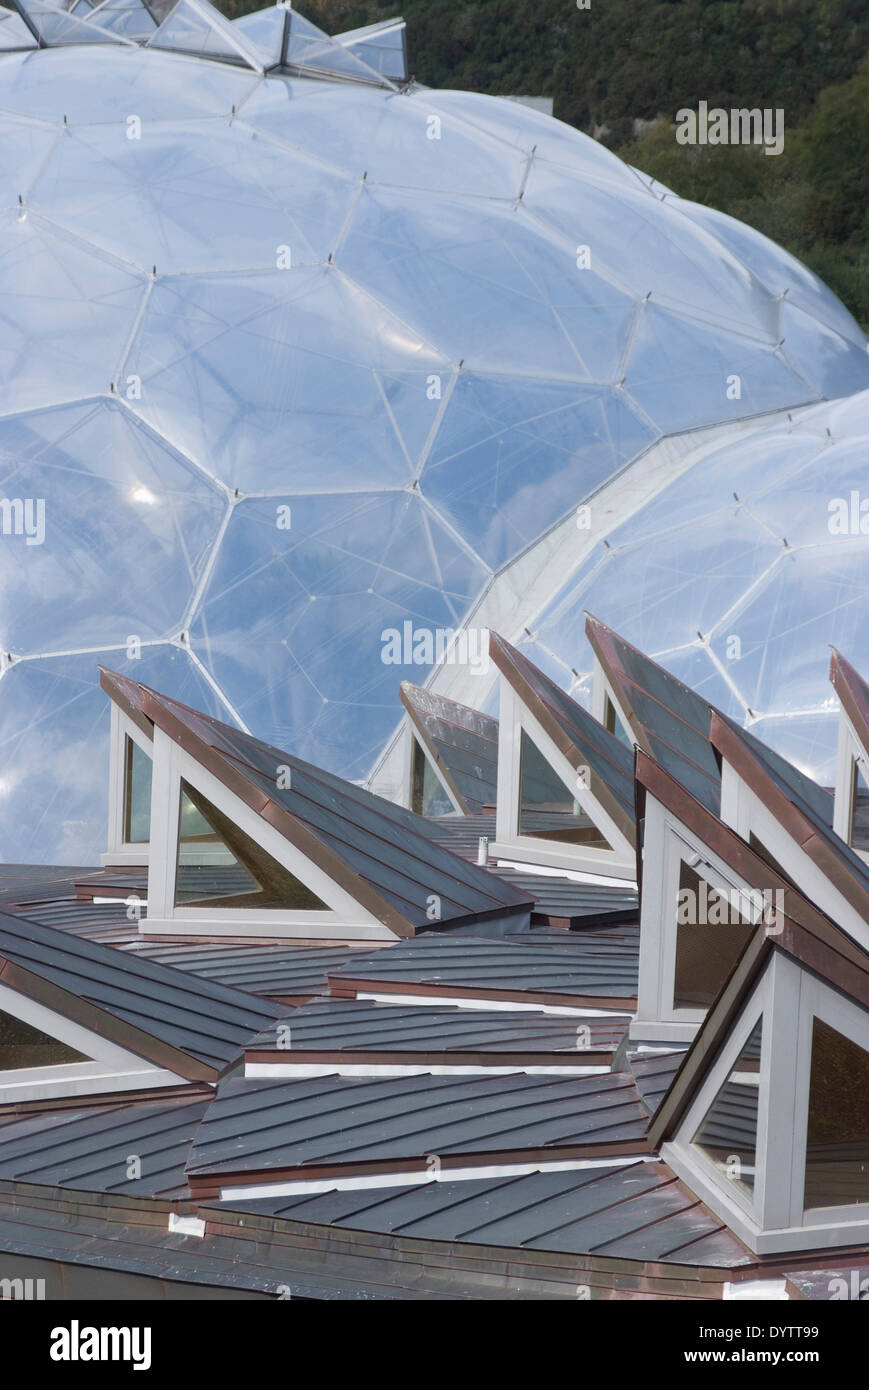 Roof detail with biodomes behind at the Eden Project, Bodelva, St Austell, Cornwall, UK Stock Photo